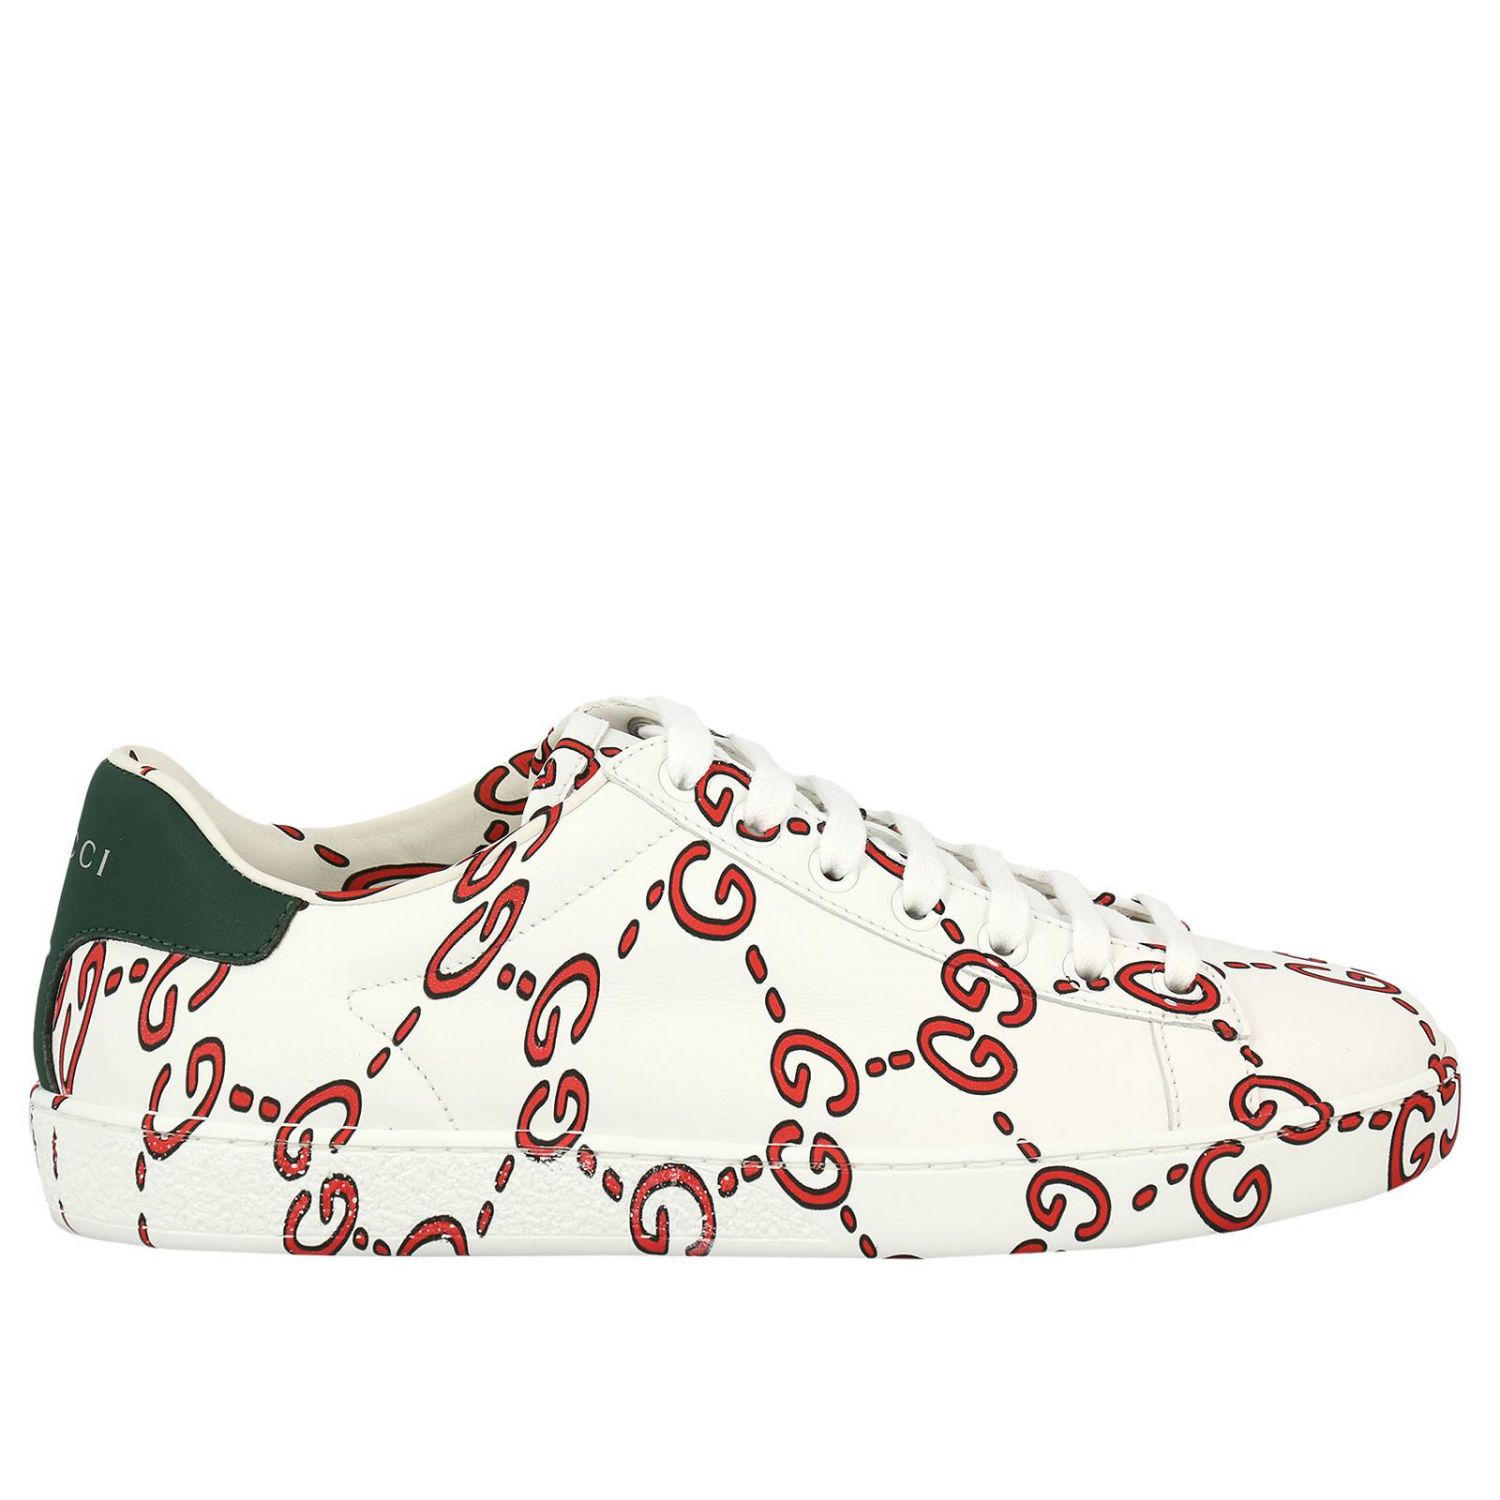 all gucci shoes,Save up to 15%,www.ilcascinone.com